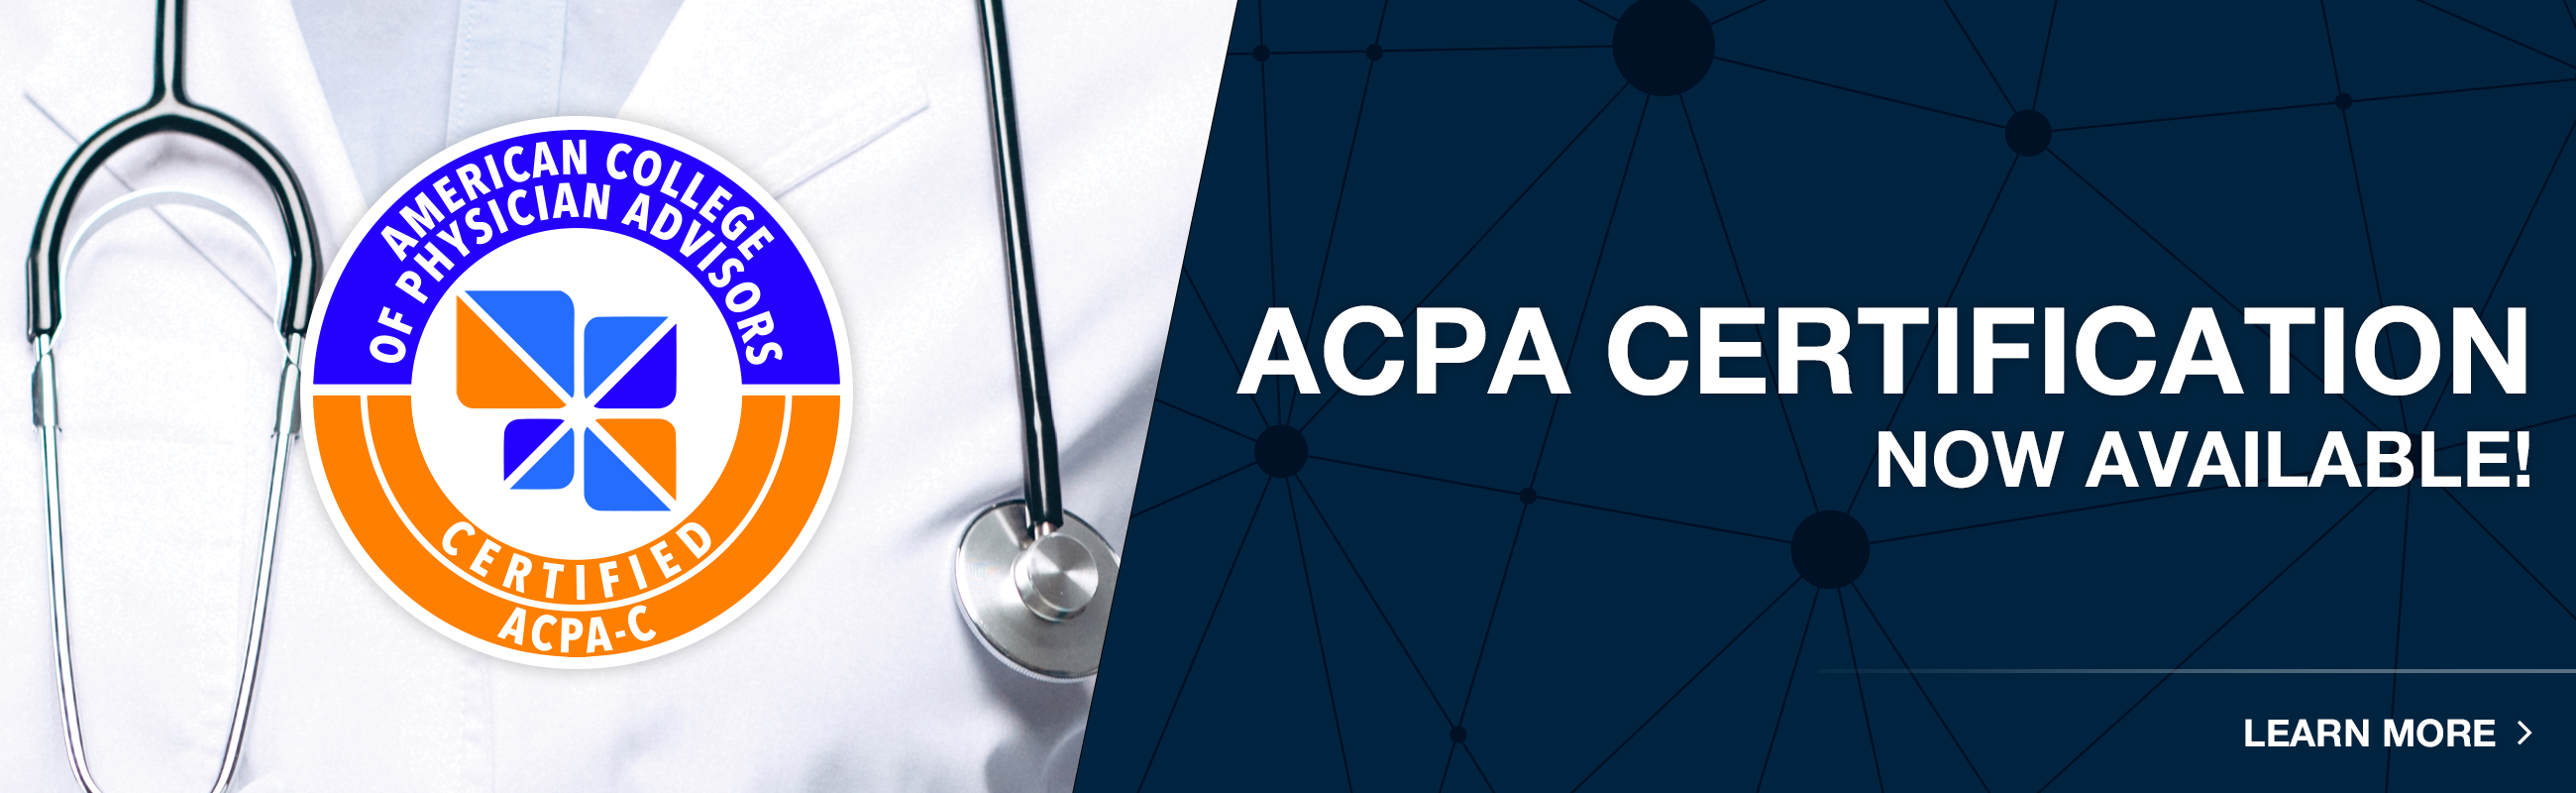 ACPA-C Now Available!